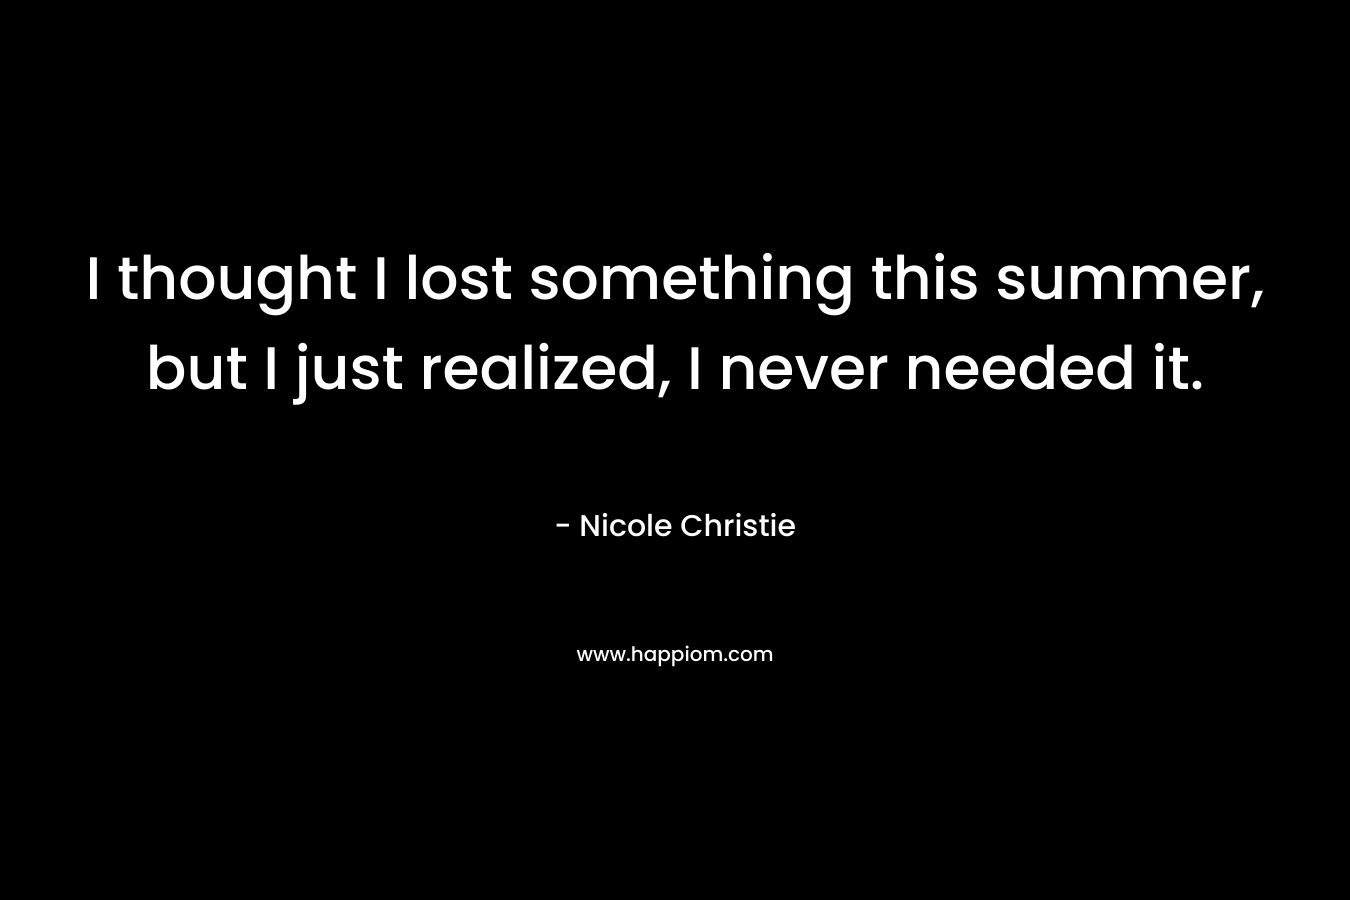 I thought I lost something this summer, but I just realized, I never needed it. – Nicole Christie